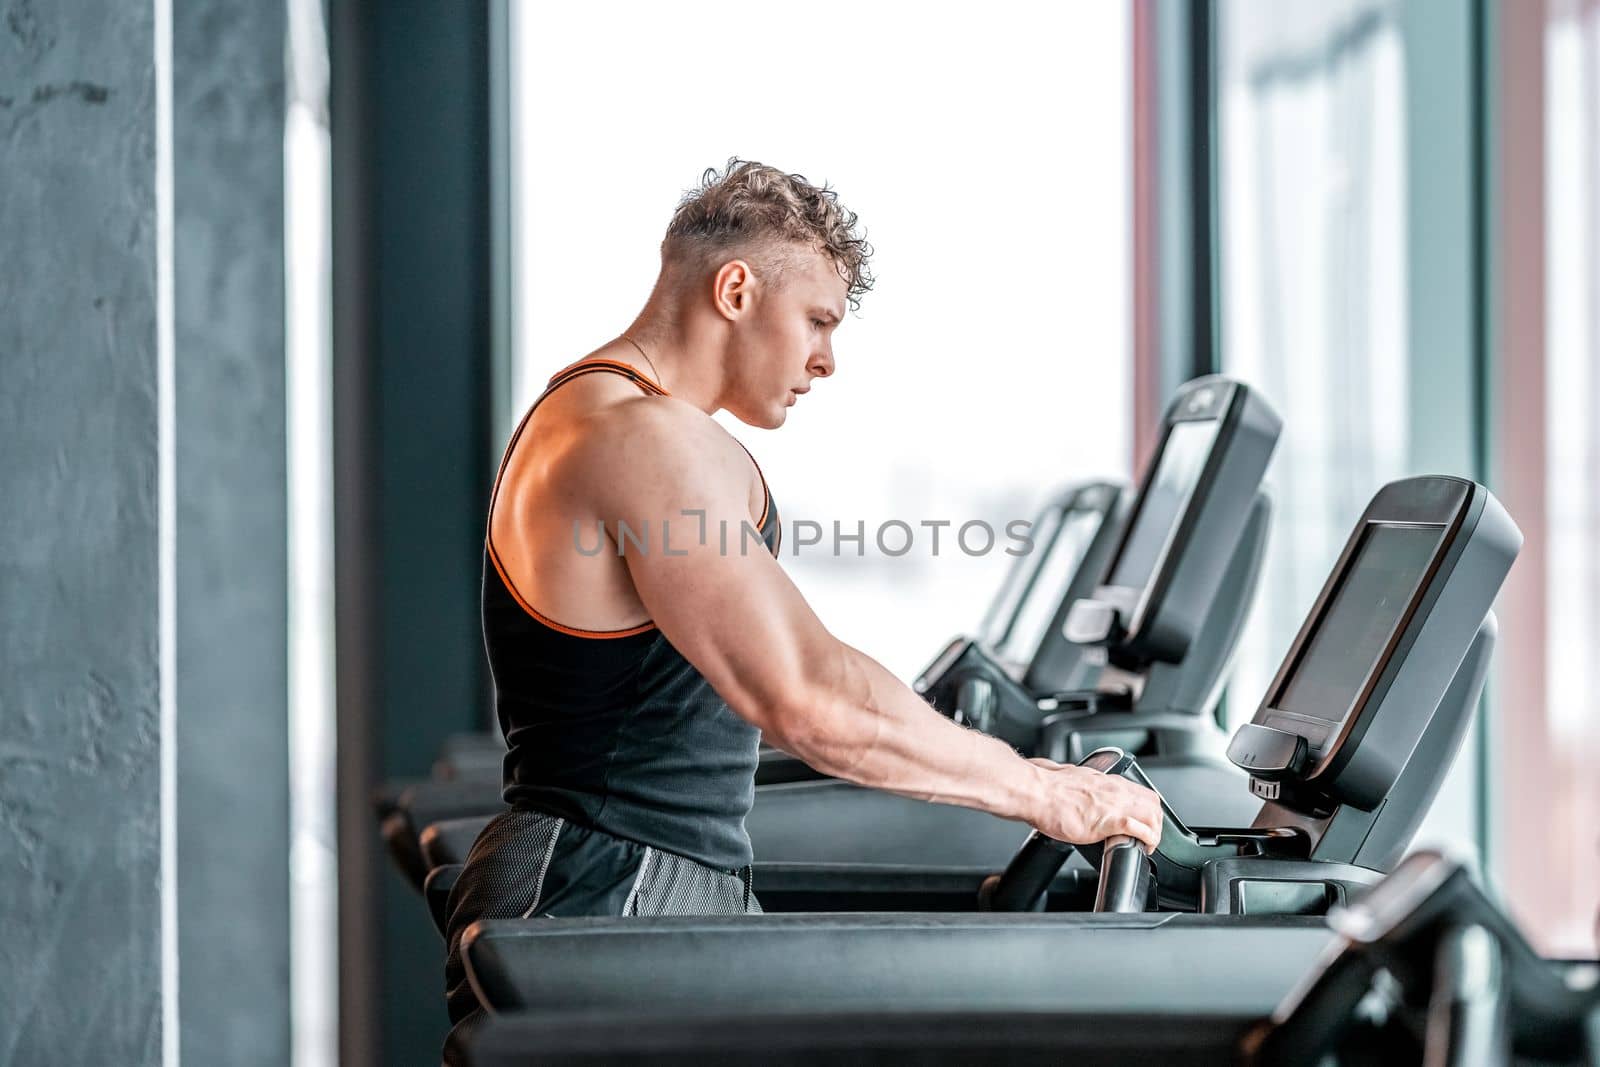 athlete on a treadmill in the gym by Edophoto